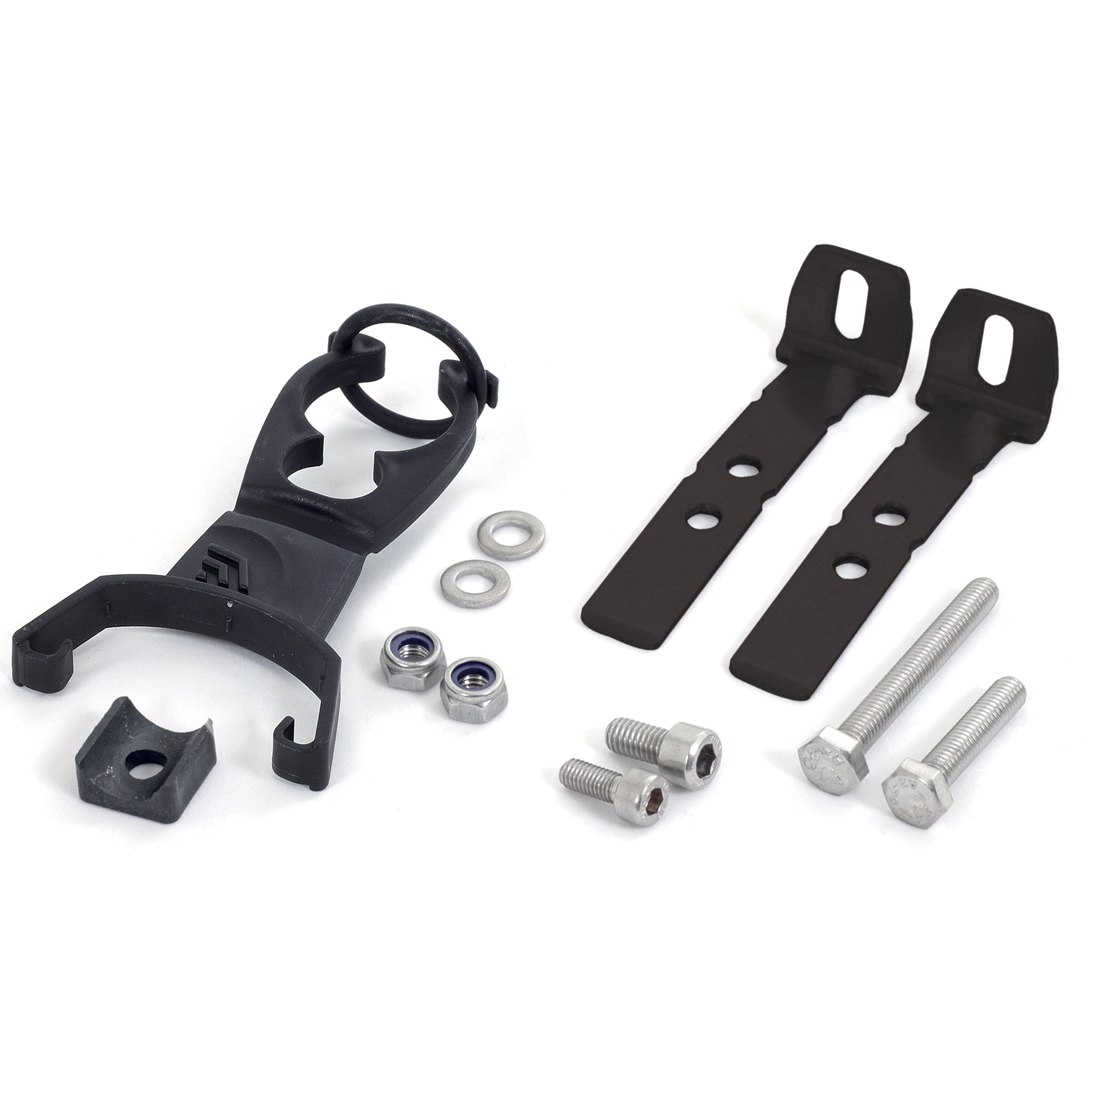 Image of Hebie Mounting Set for Viper 742/761